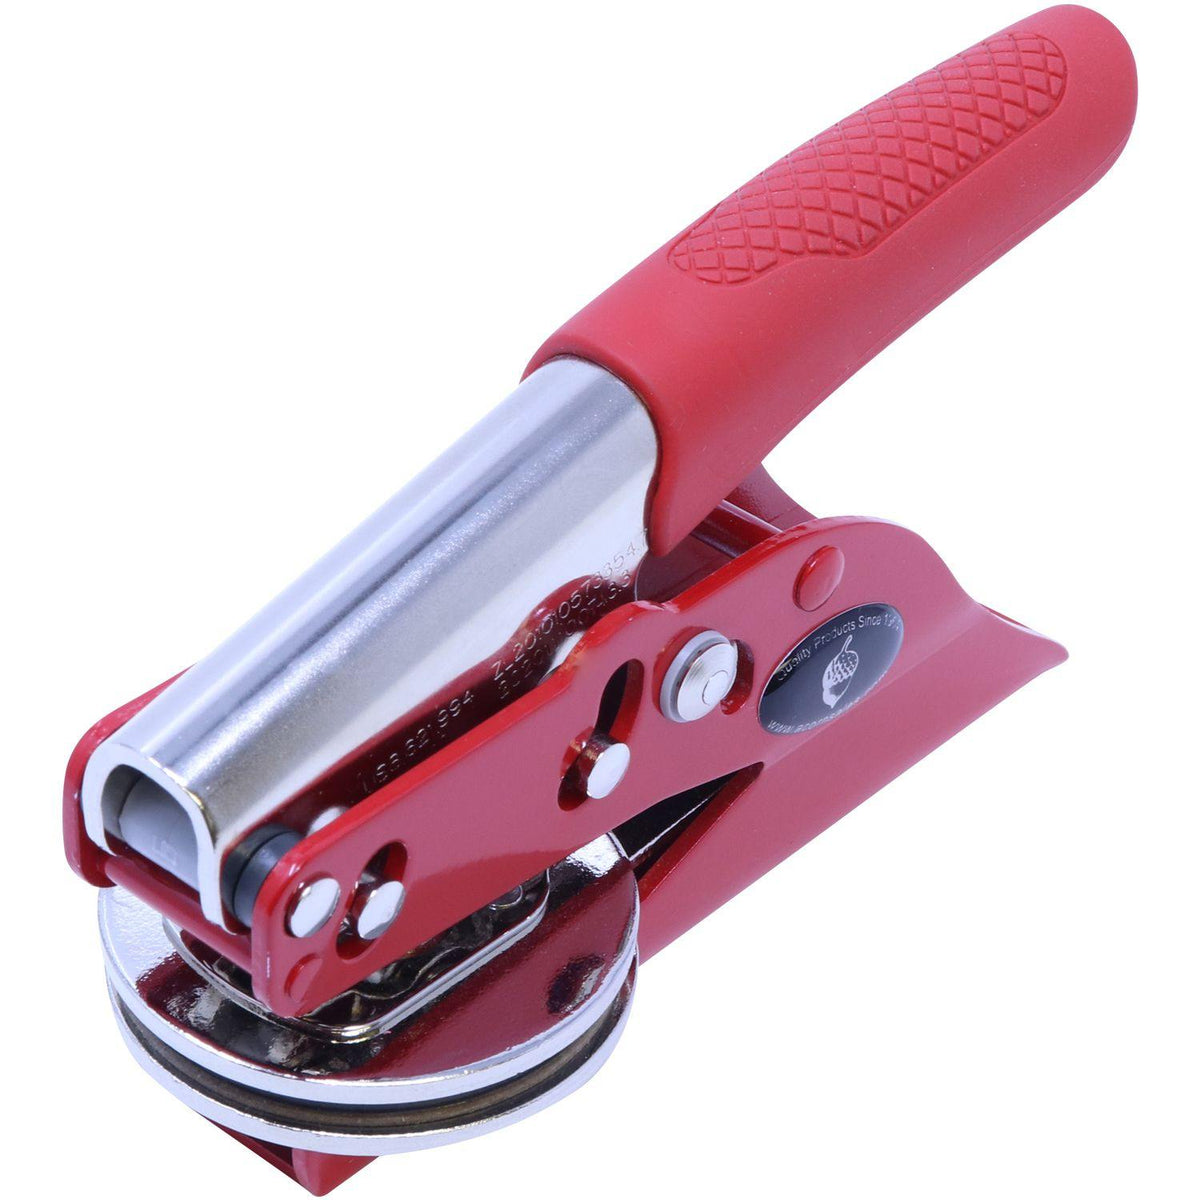 Professional Red Seal Embosser - Engineer Seal Stamps - Embosser Type_Handheld, Embosser Type_Soft Seal, Type of Use_Professional